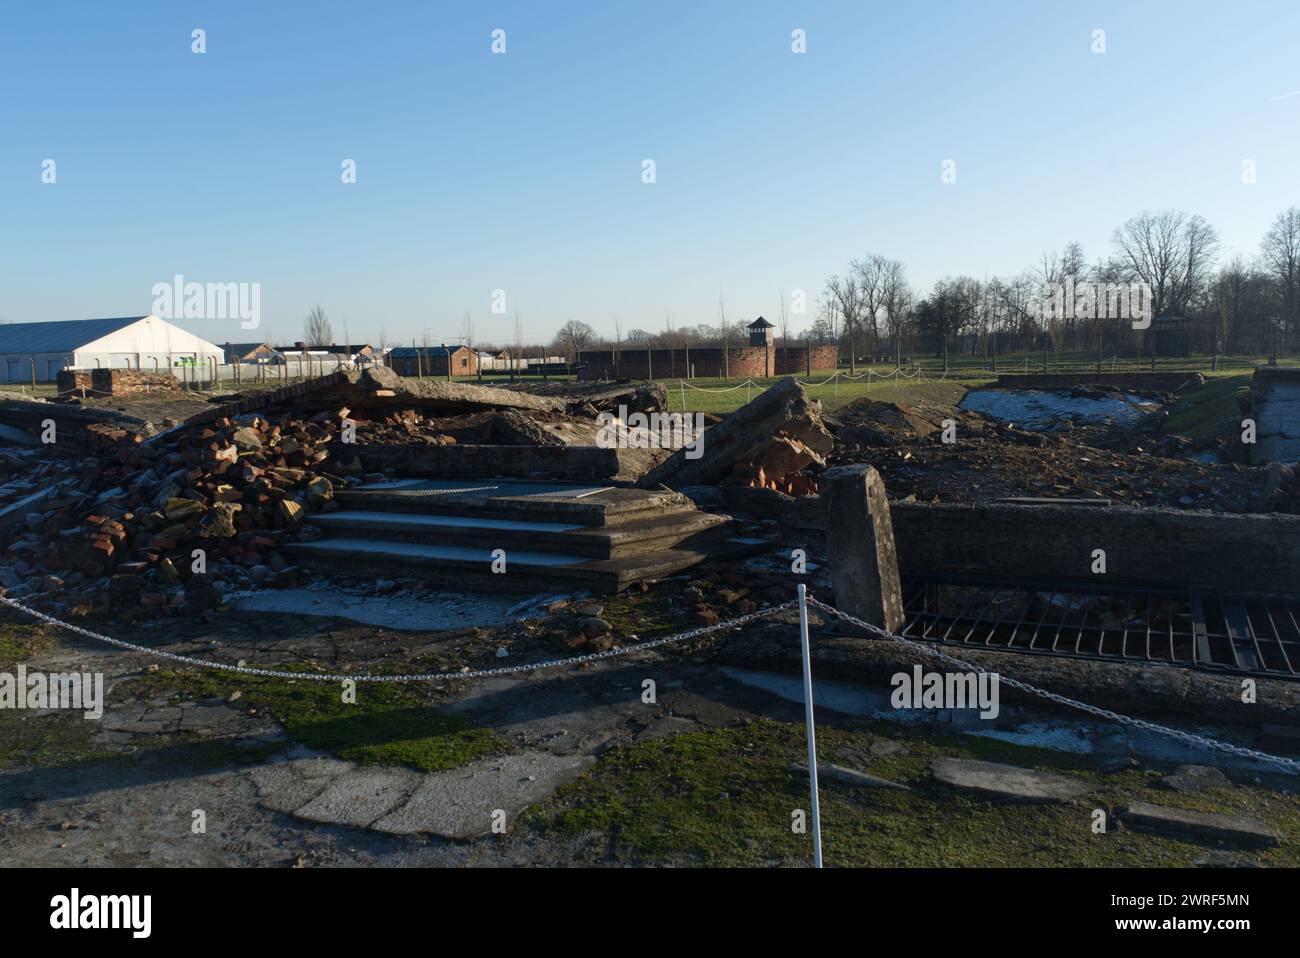 Remains of a Demolished Gas Chamber - Auschwitz-Berkenau Concentration Camp, Poland. Stock Photo